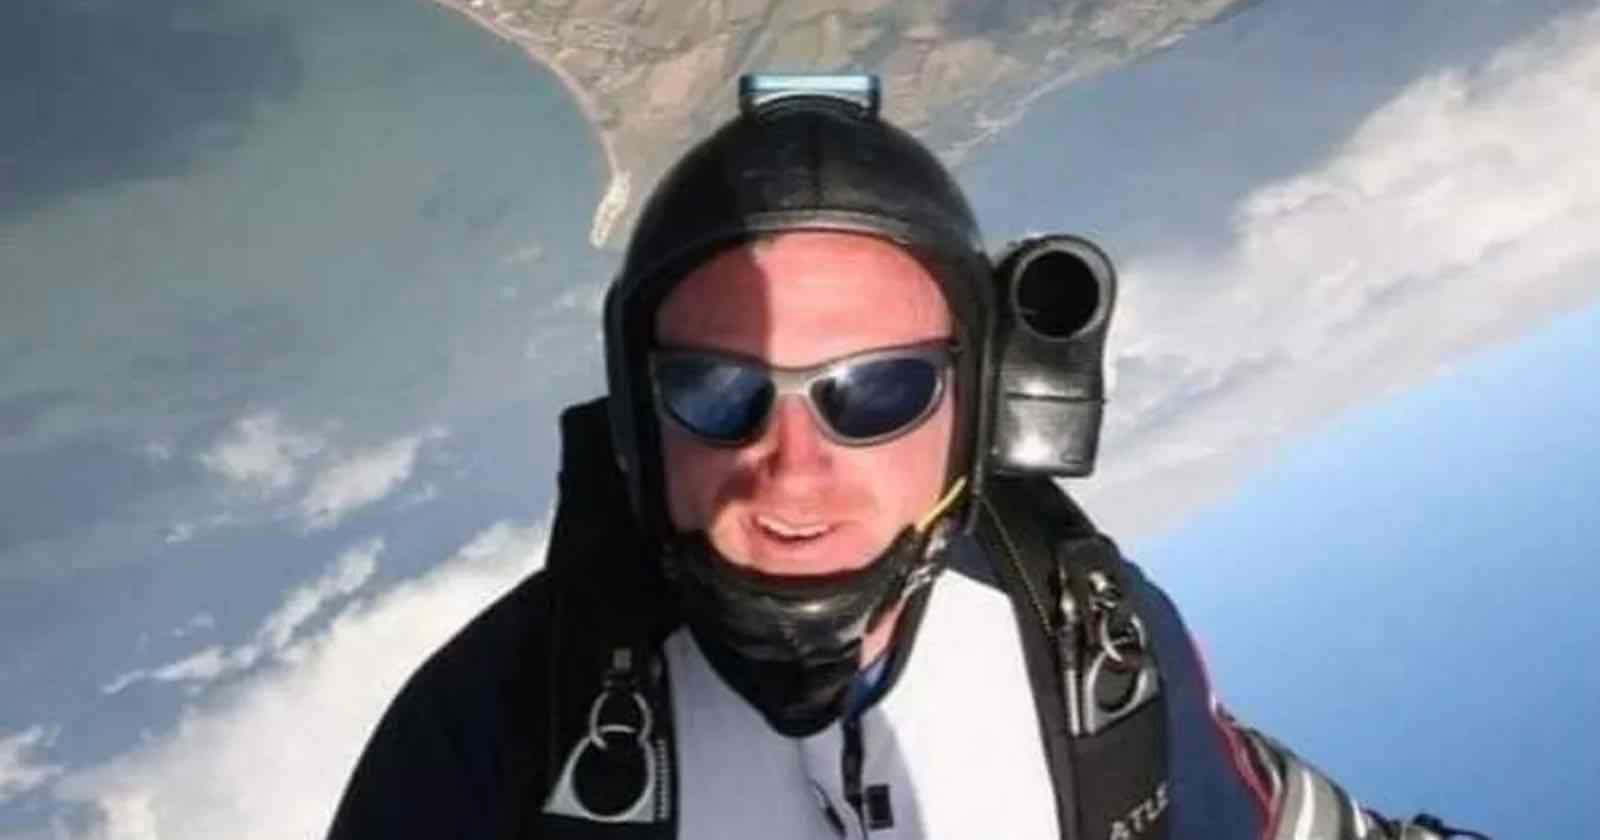  videographer employed skydiving company dies after parachute fails 